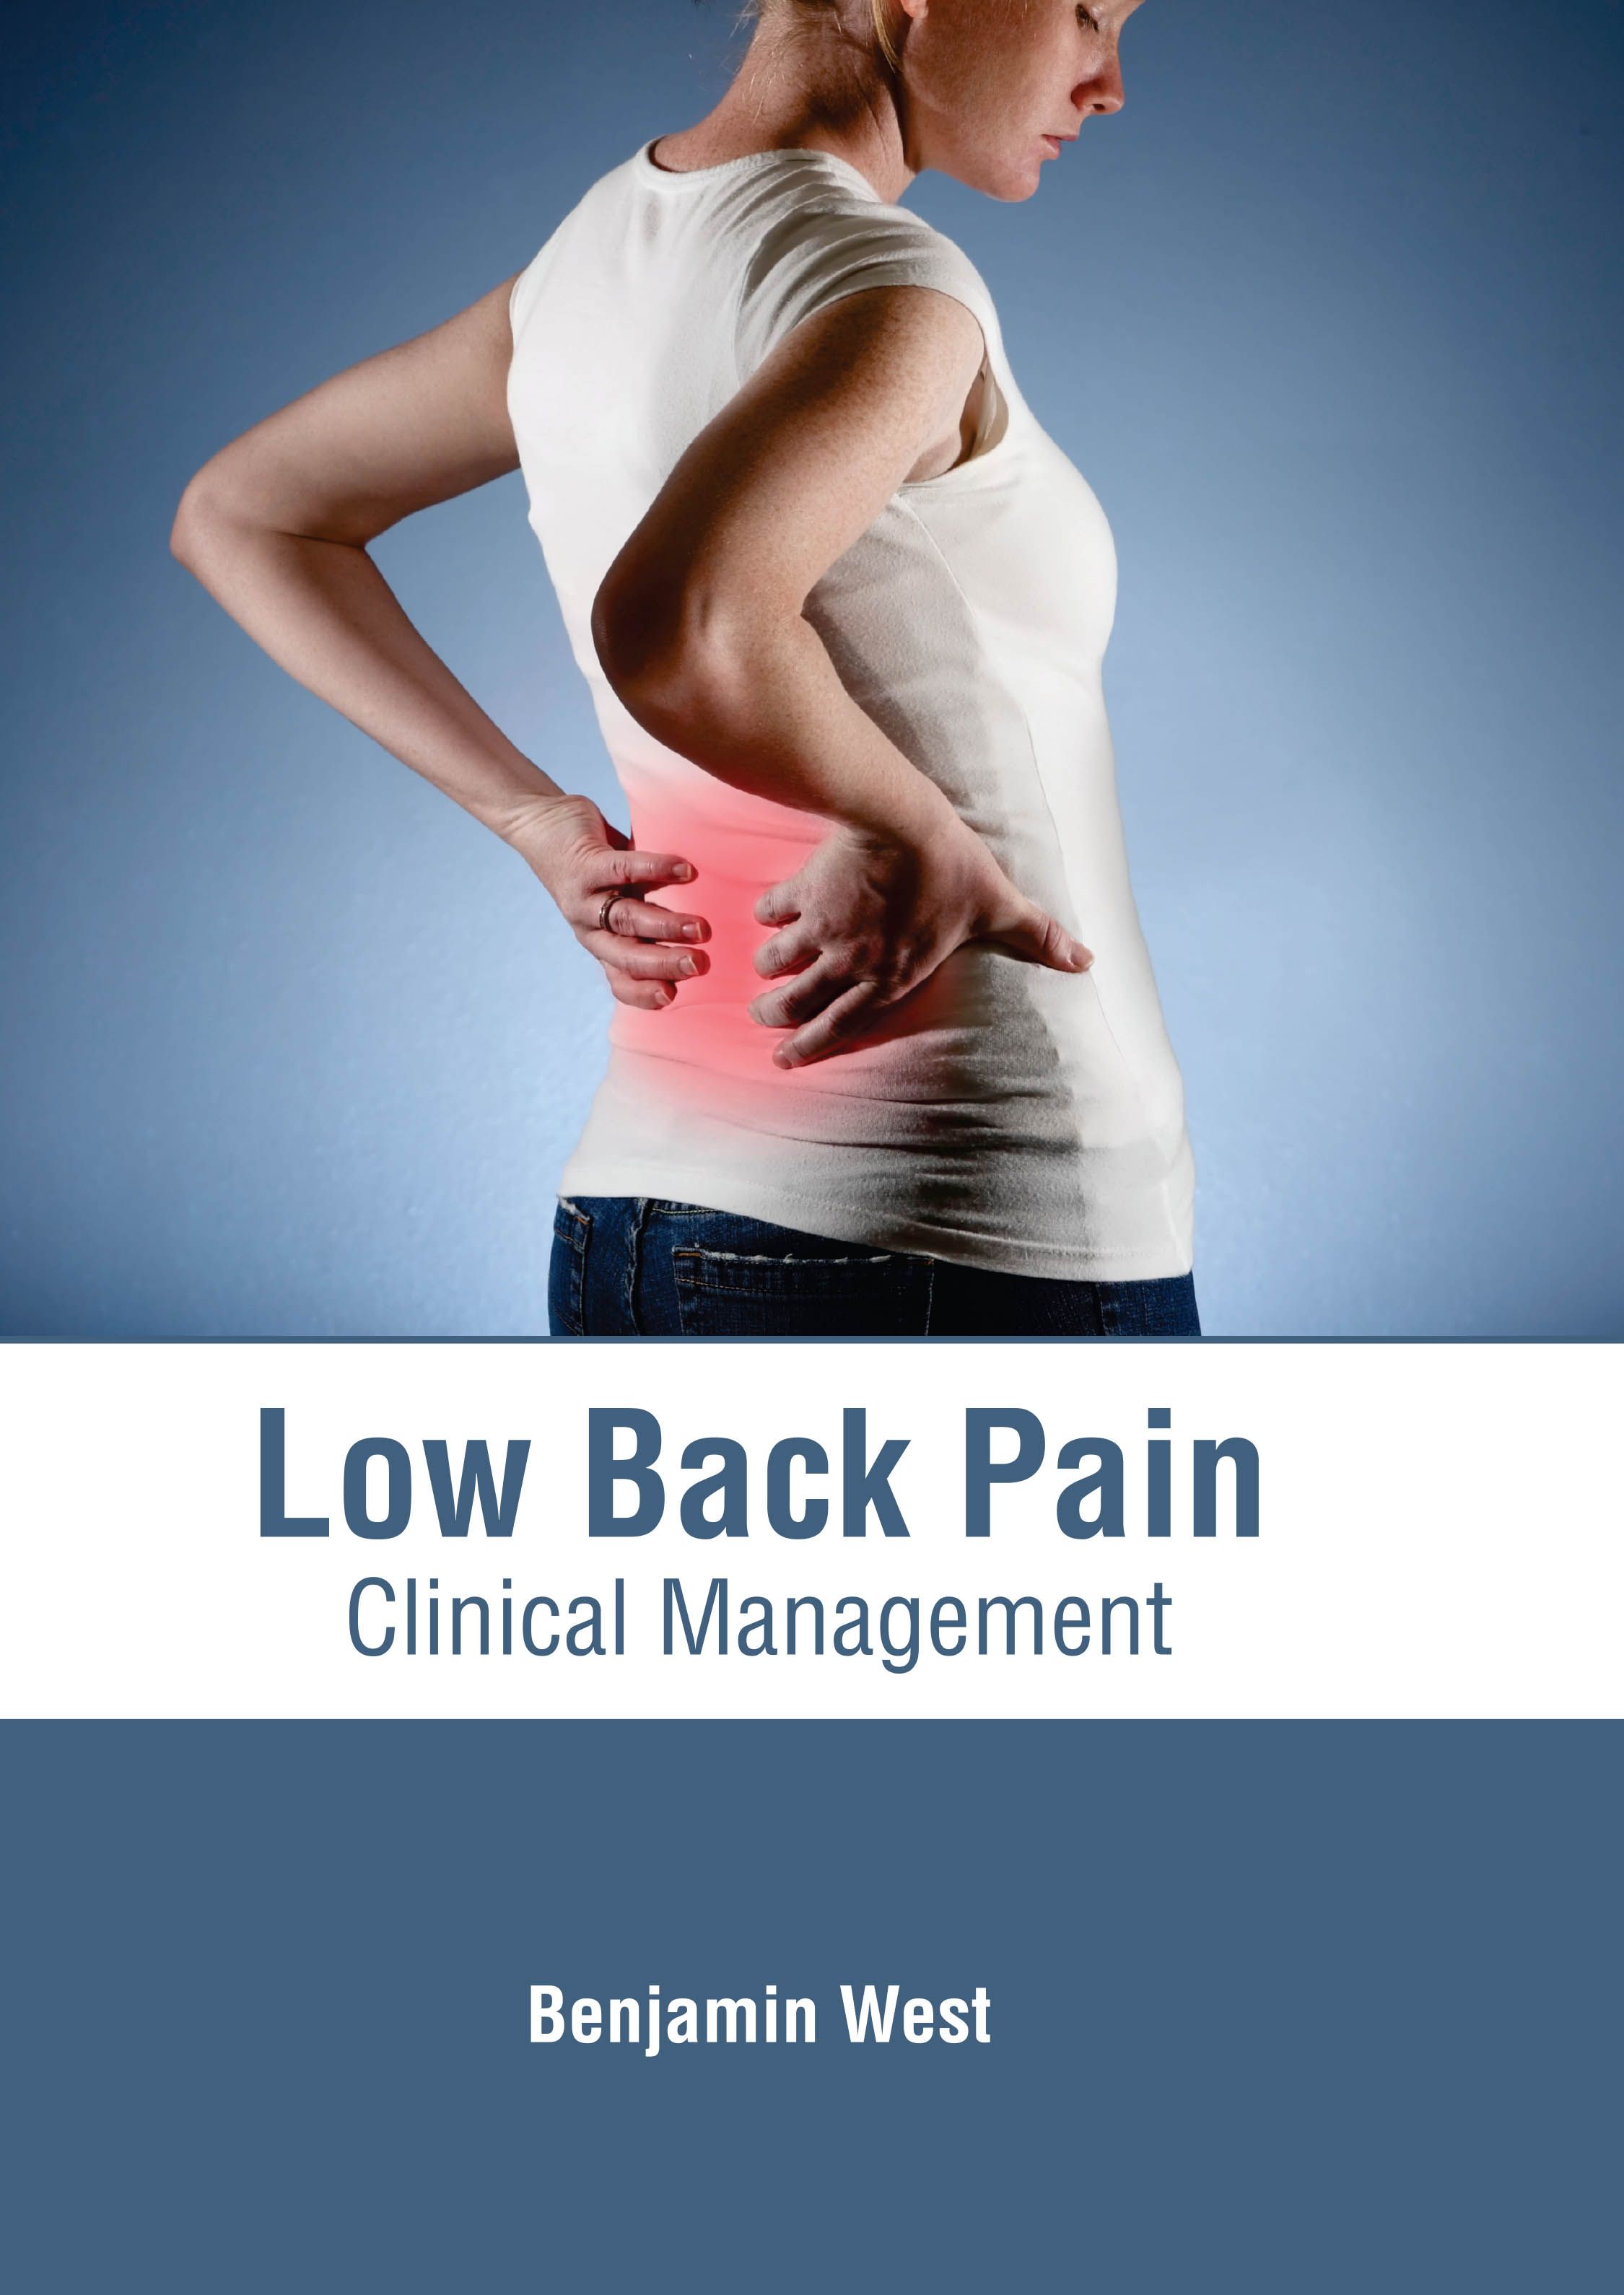 

exclusive-publishers/american-medical-publishers/low-back-pain-clinical-management-9781639273980